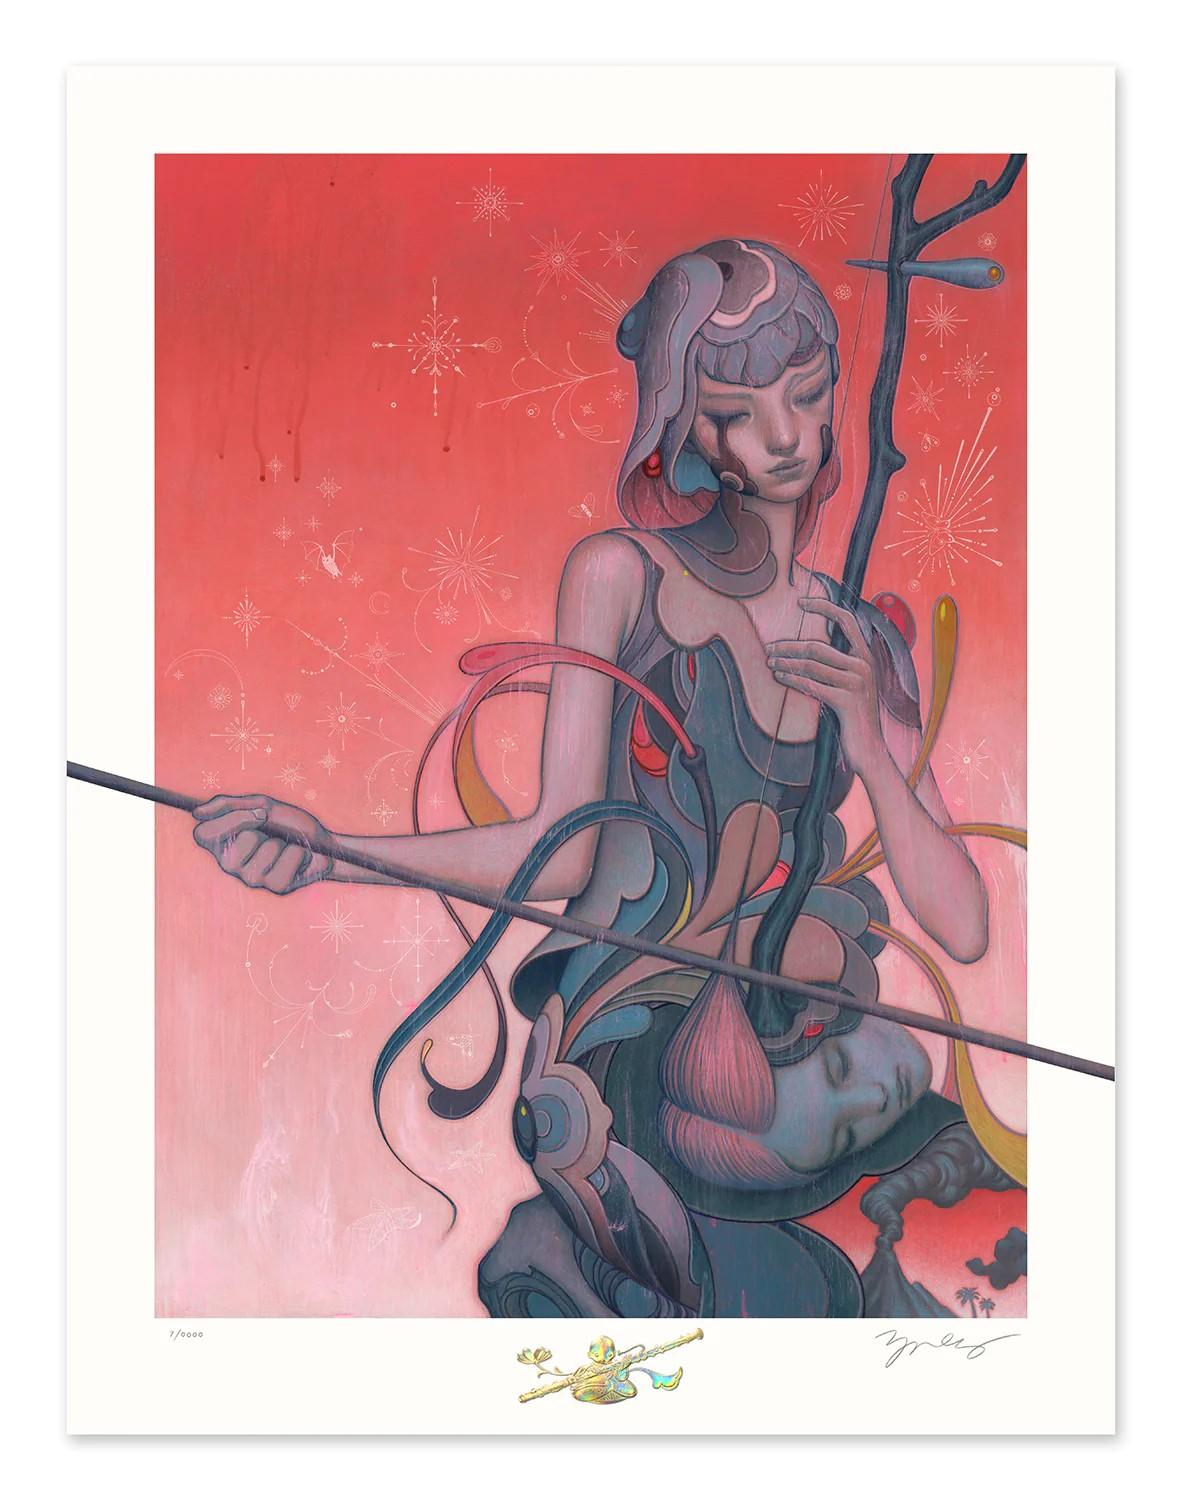 Erhu is a signed and numbered time-limited edition of giclée prints. The erhu, or spike fiddle, typically has two strings, but the instrument being played here is missing a tuning spike. Perhaps the other spike was used to silence the lover, and now